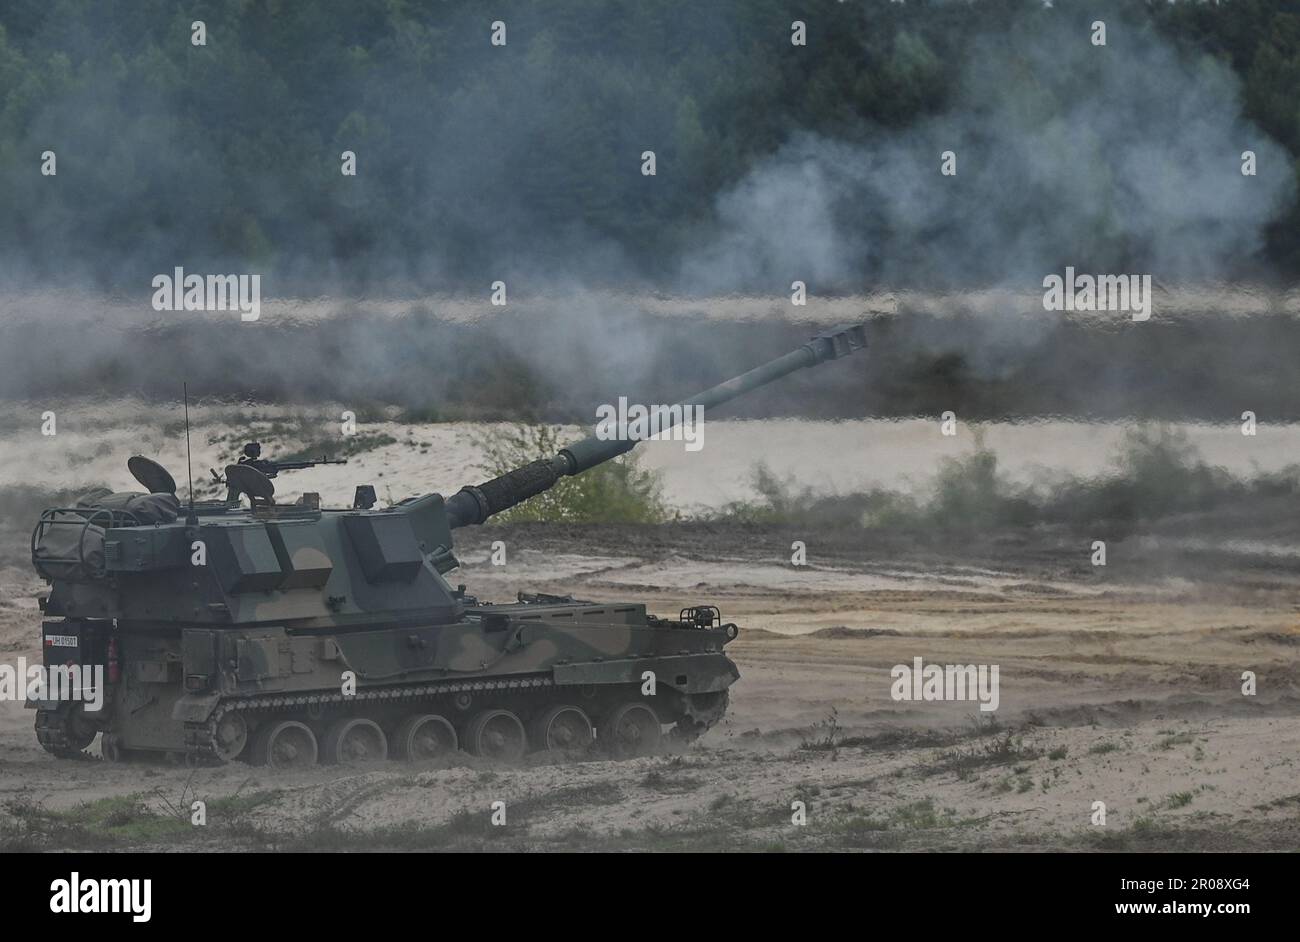 AHS Krab, a 155 mm NATO-compatible self-propelled tracked gun-howitzer. Soldiers from Poland, USA, Slovenia and Romania, push their skills to the limit during a high-intensity ANACONDA-23 training session at the Nowa Deba training ground, Poland. Credit: ASWphoto/Alamy Live News Stock Photo